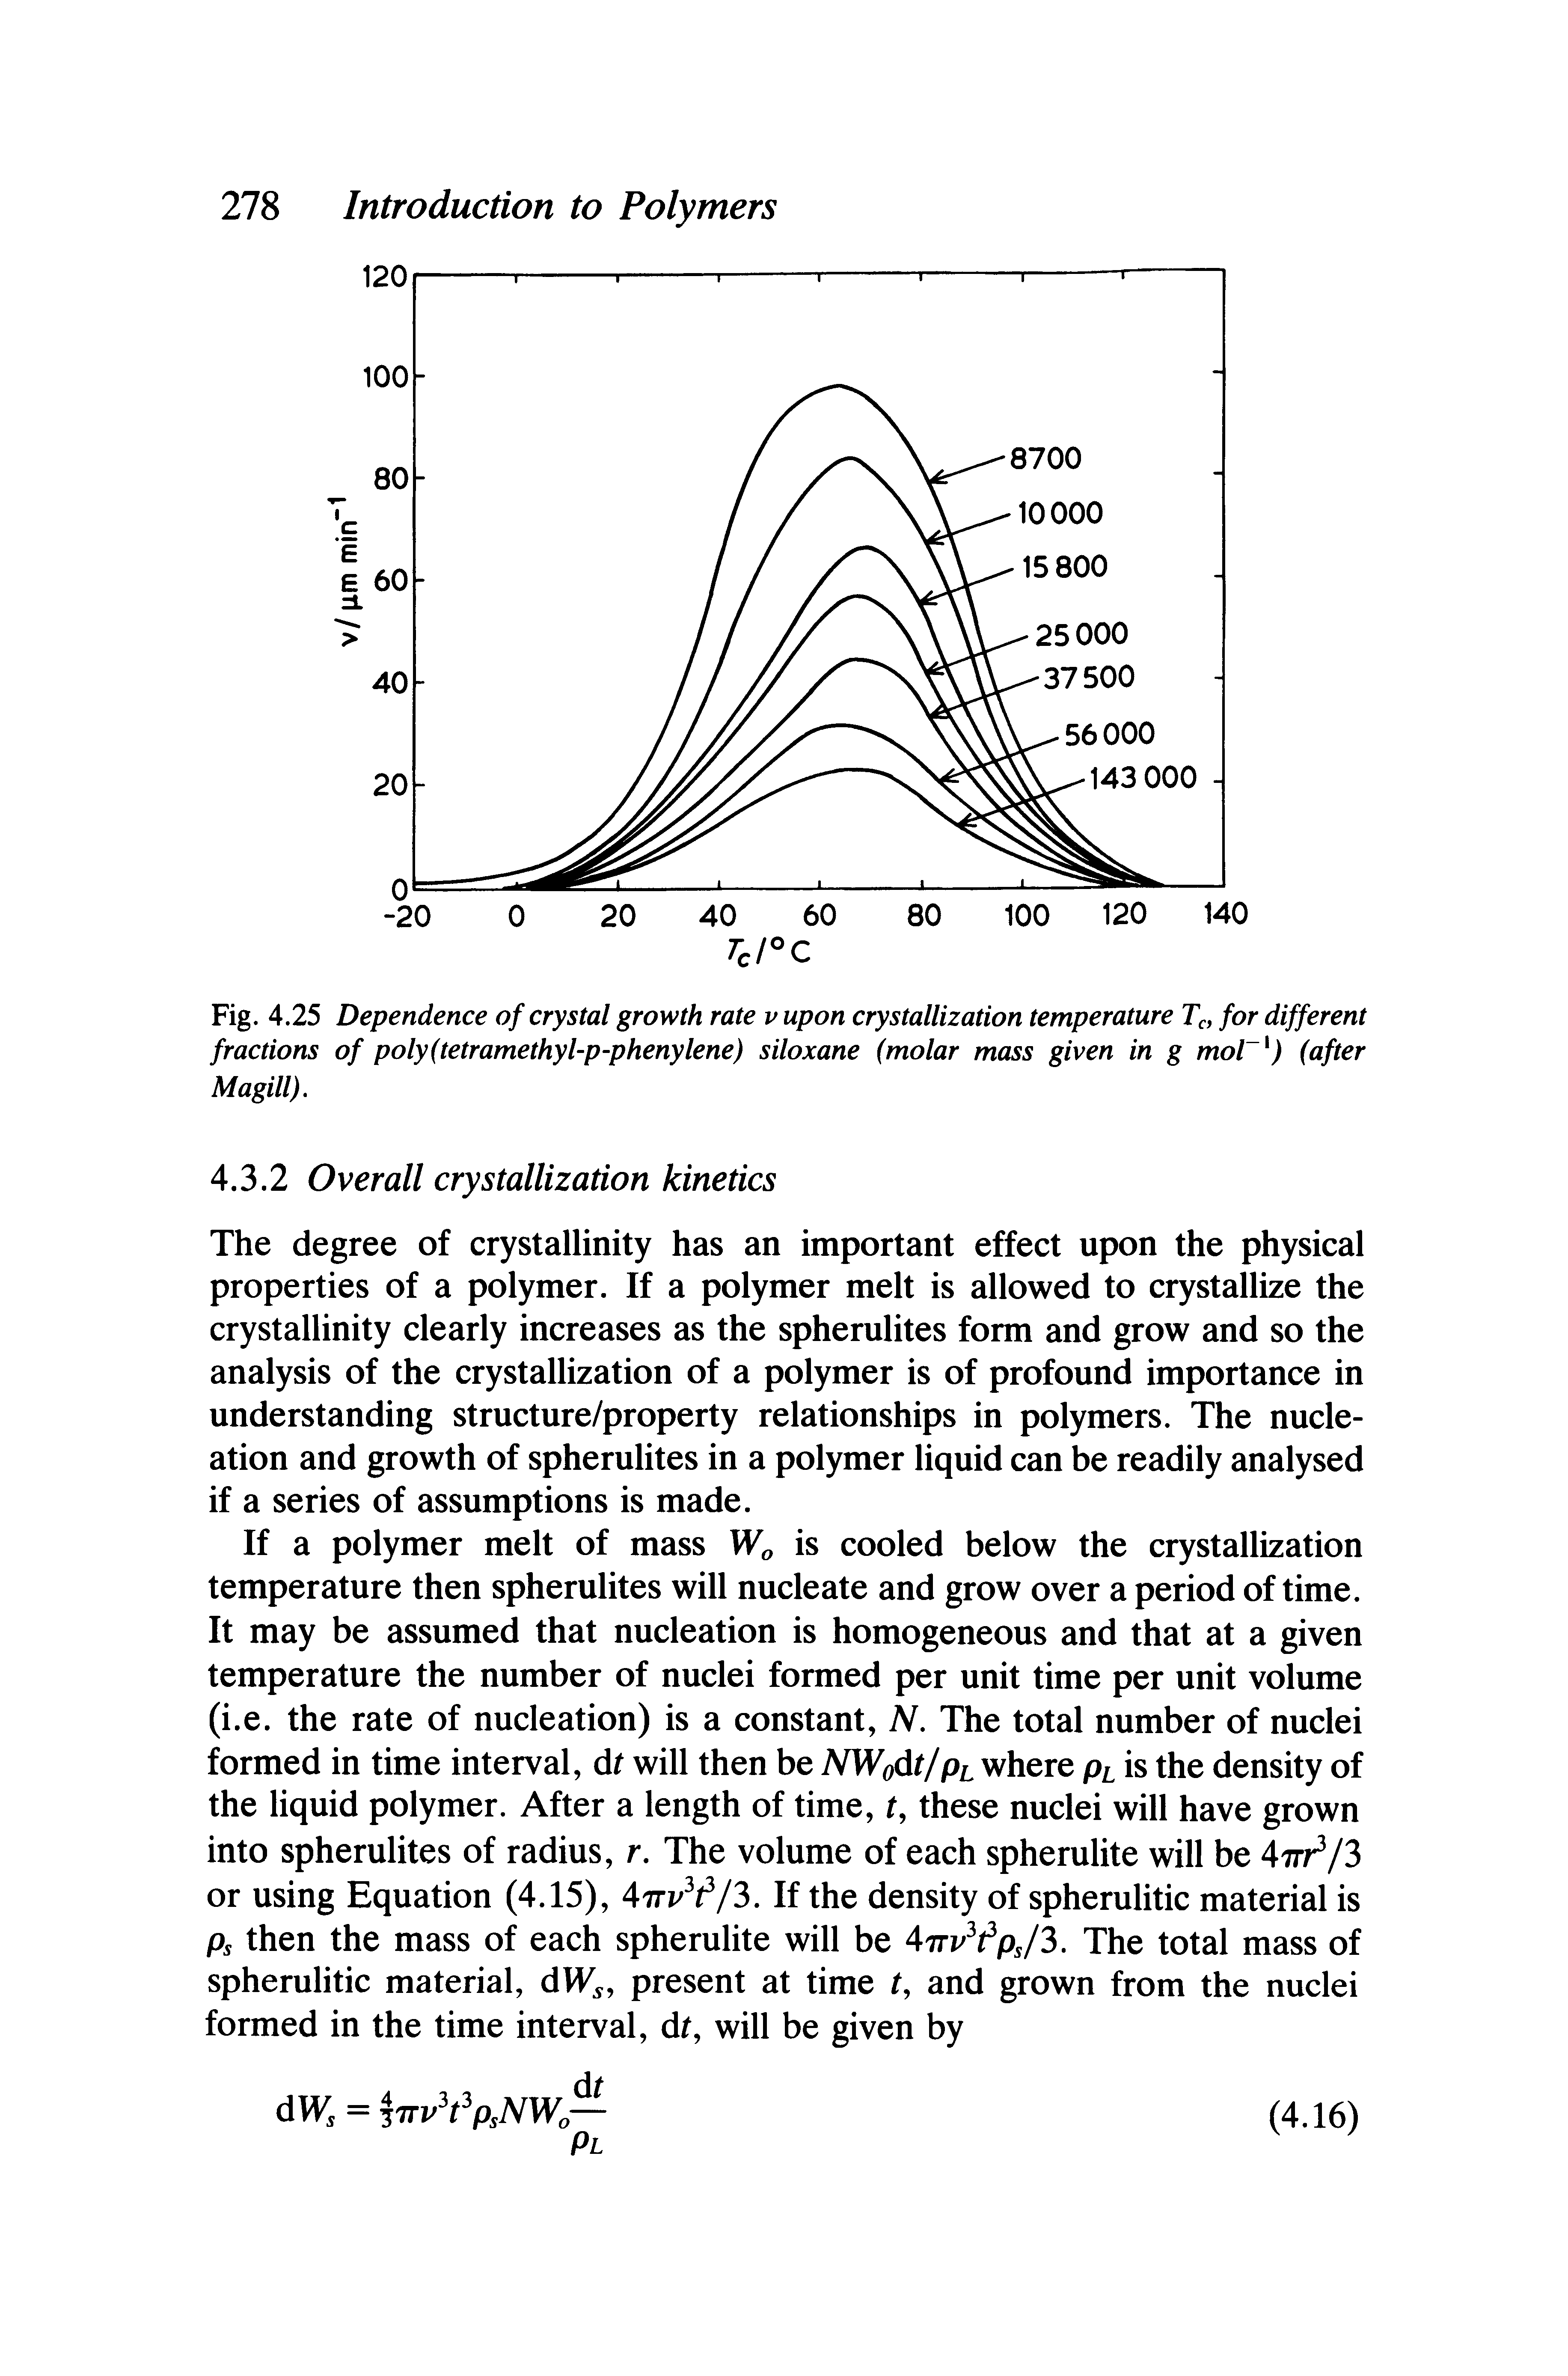 Fig. 4.25 Dependence of crystal growth rate v upon crystallization temperature Tc, for different fractions of poly(tetramethyl-p-phenylene) siloxane (molar mass given in g mol ) (after Magill).